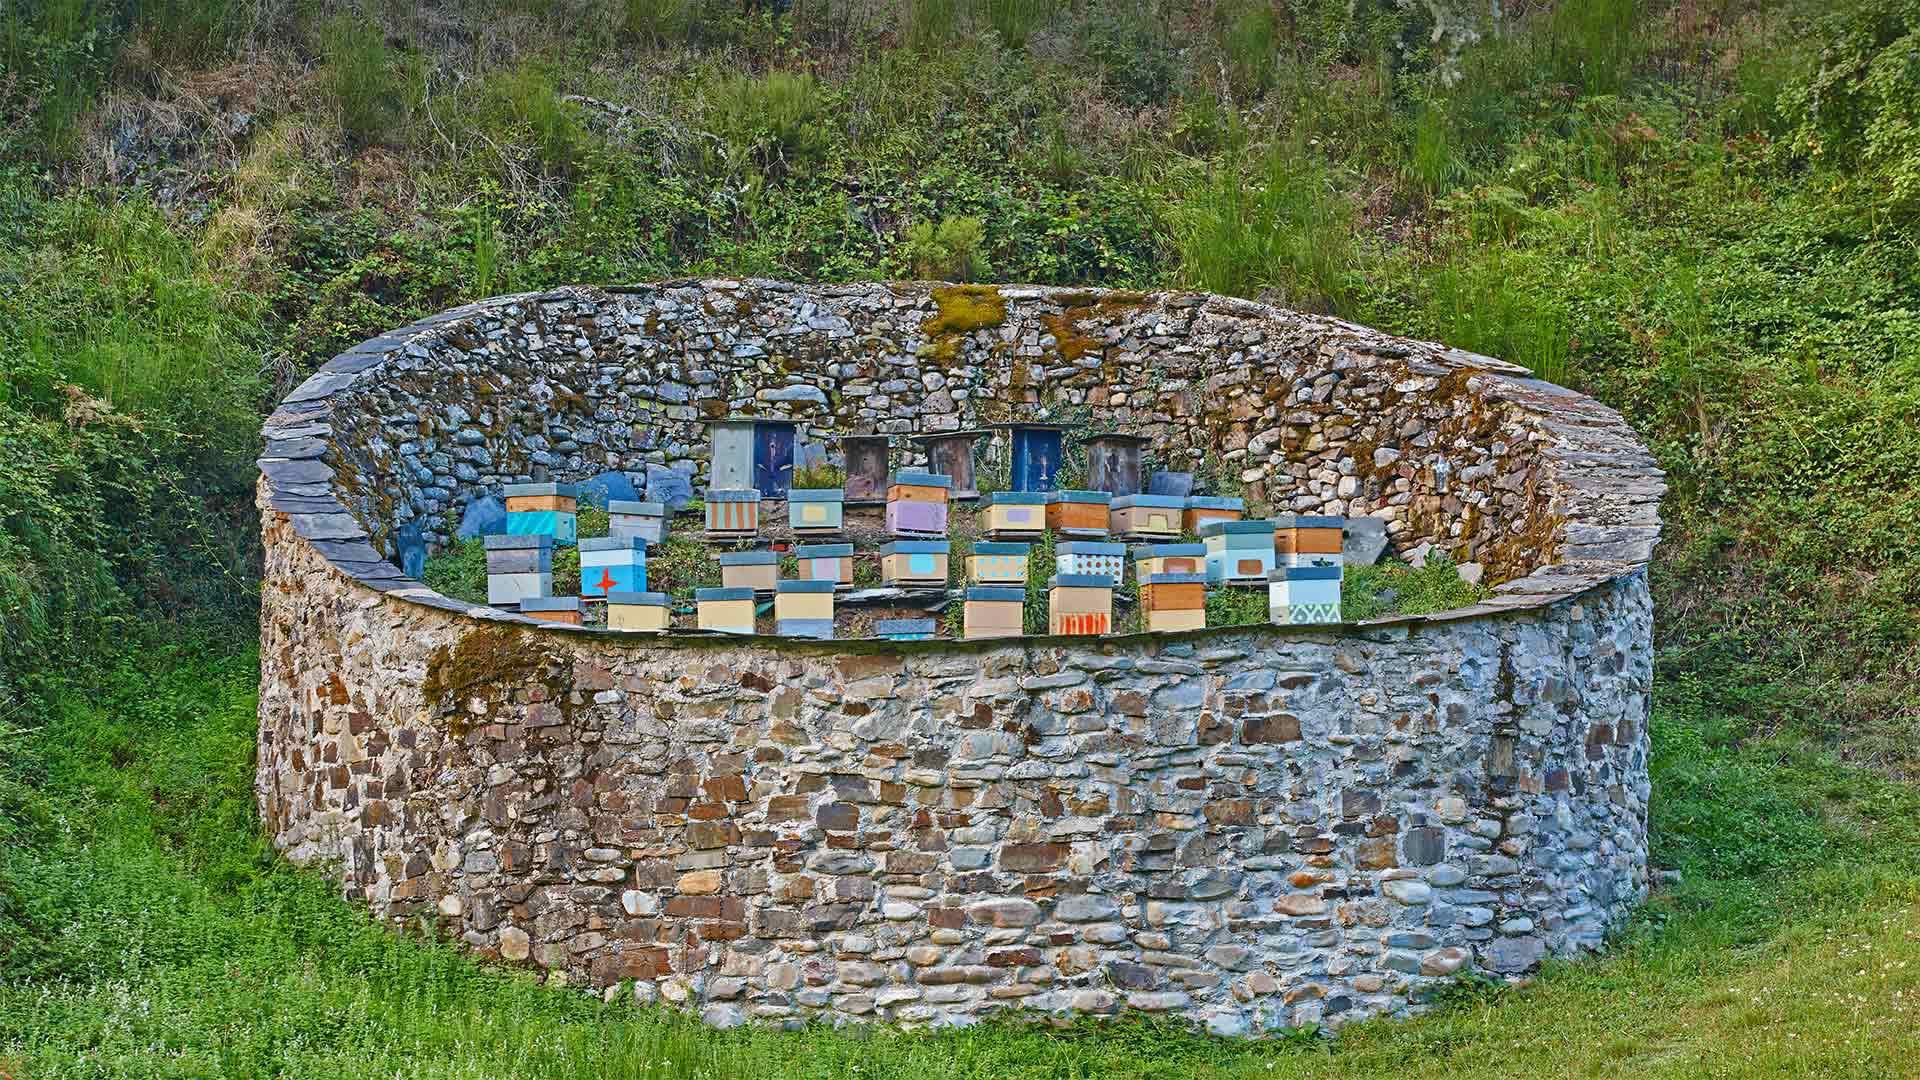 Beehives in the Muniellos Nature Reserve, Asturias province, Spain - ABB Photo/Shutterstock)